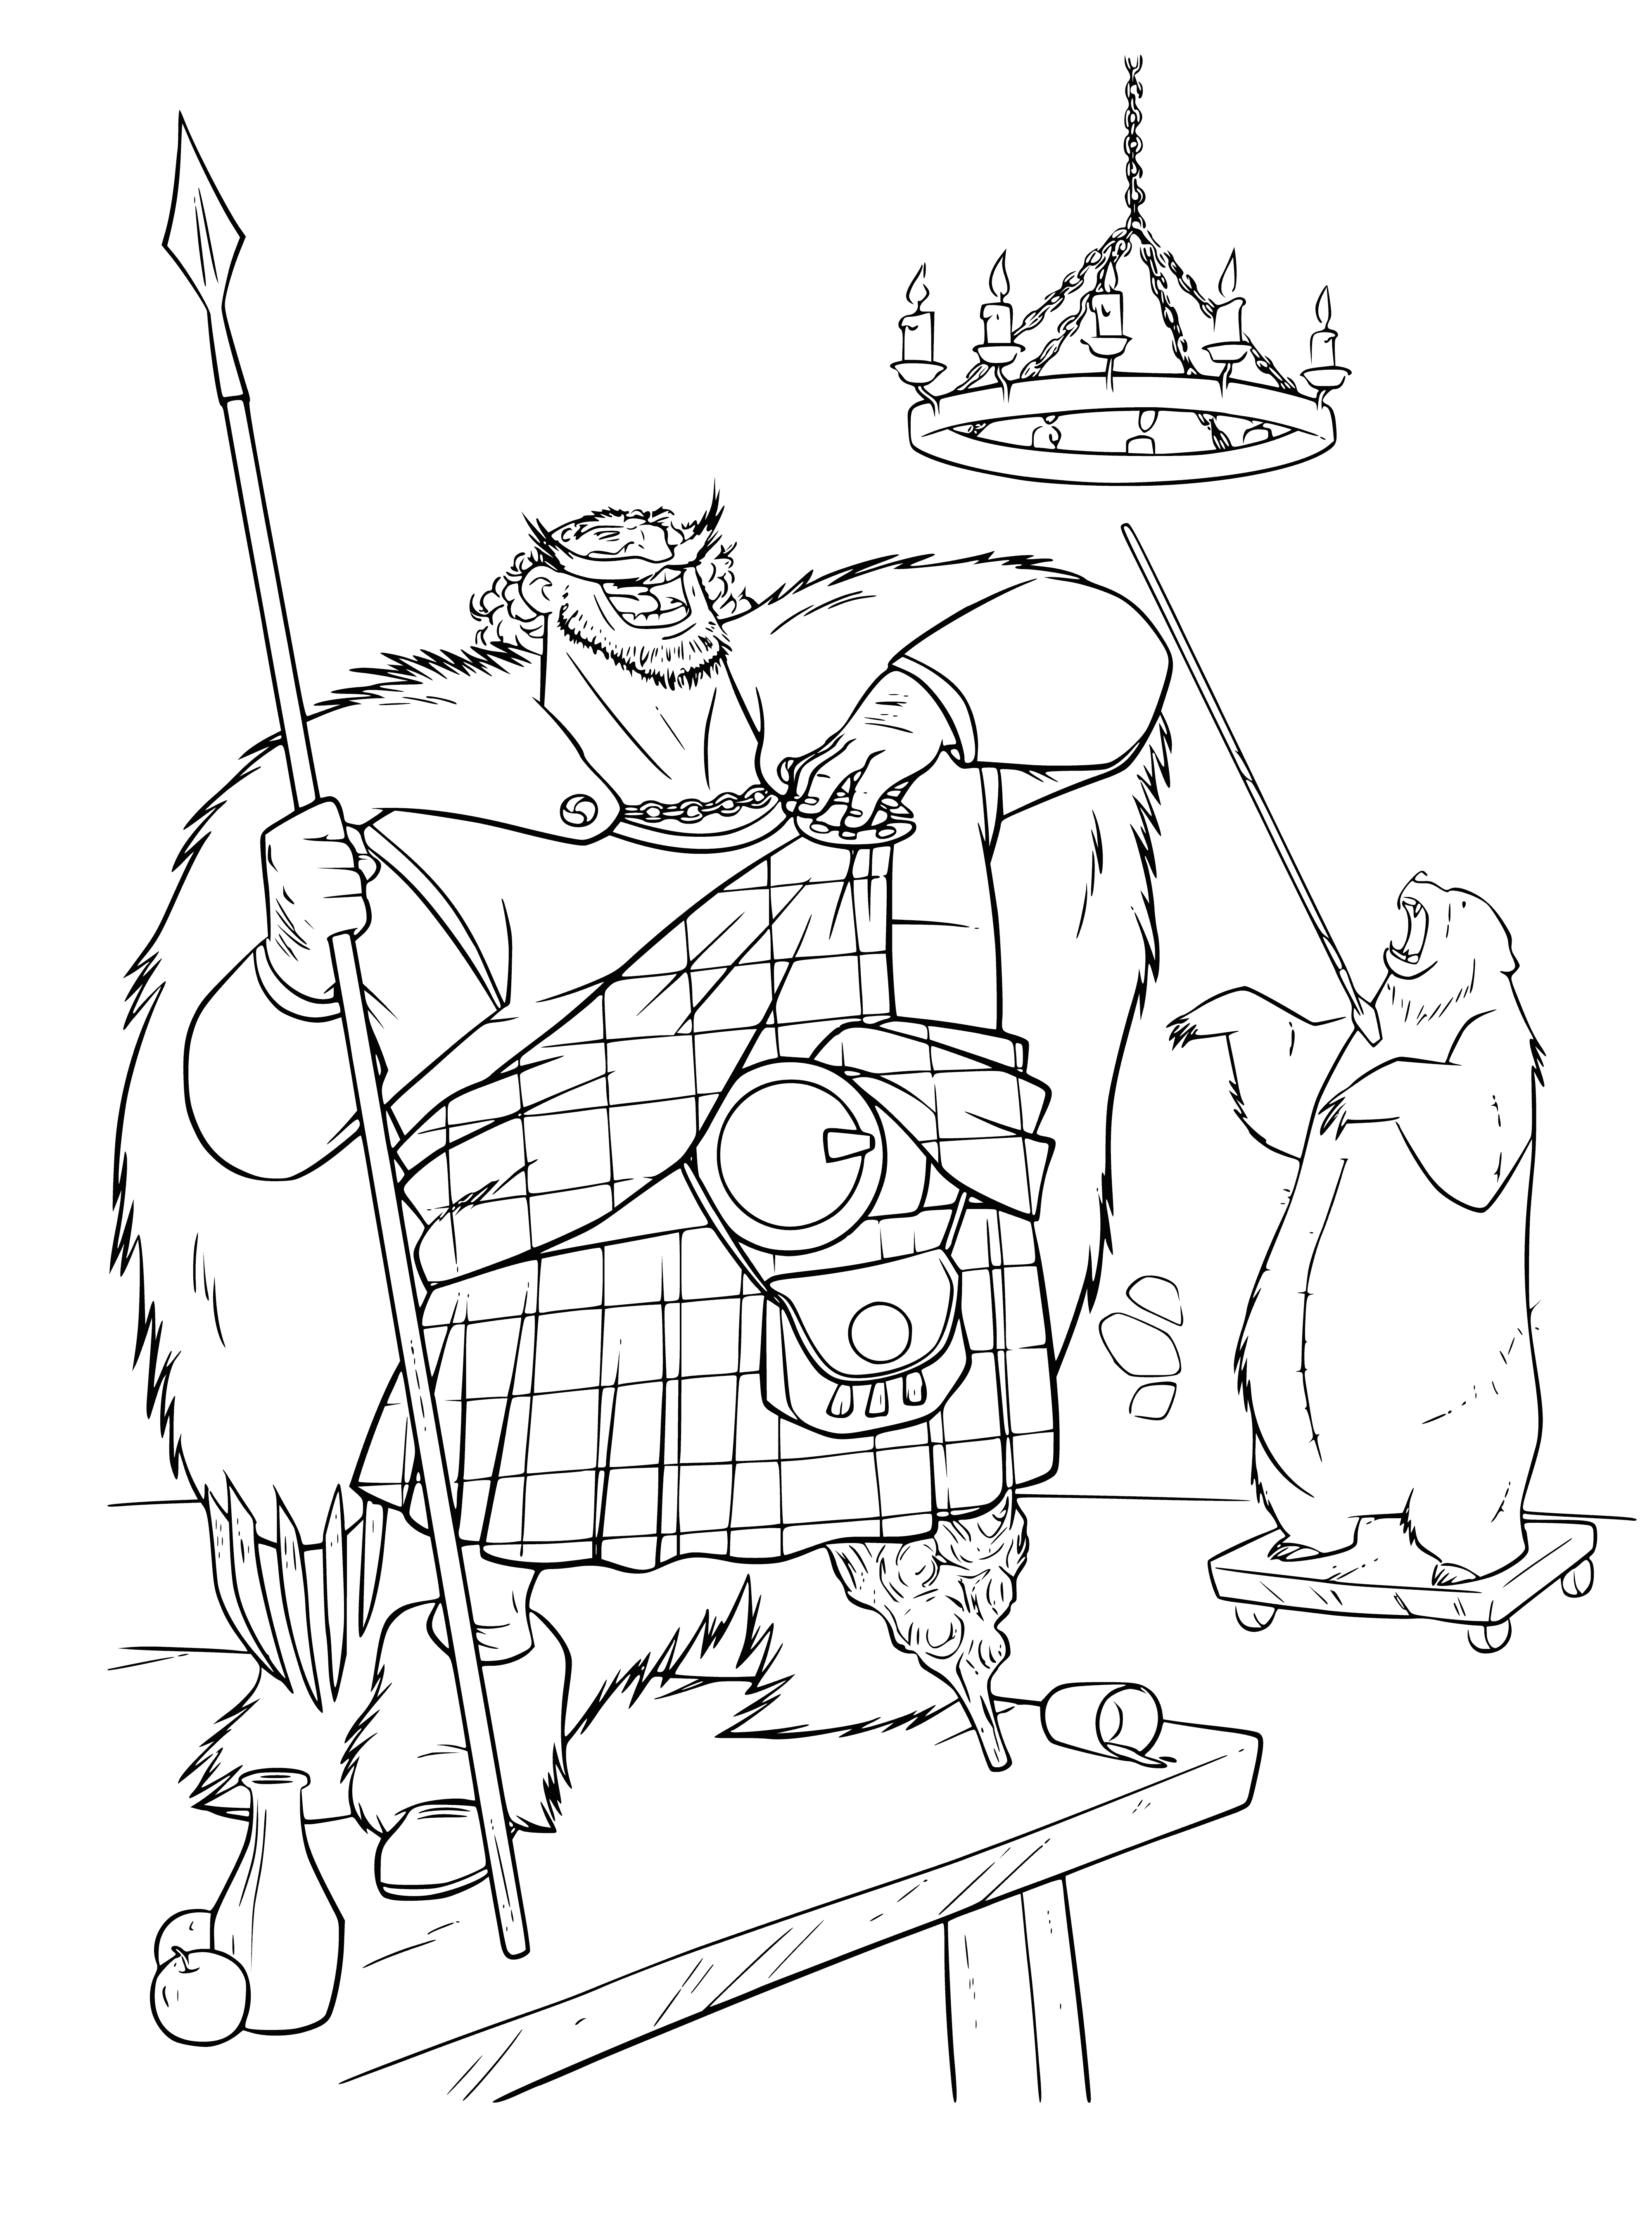 King Fergus loves hunting coloring page